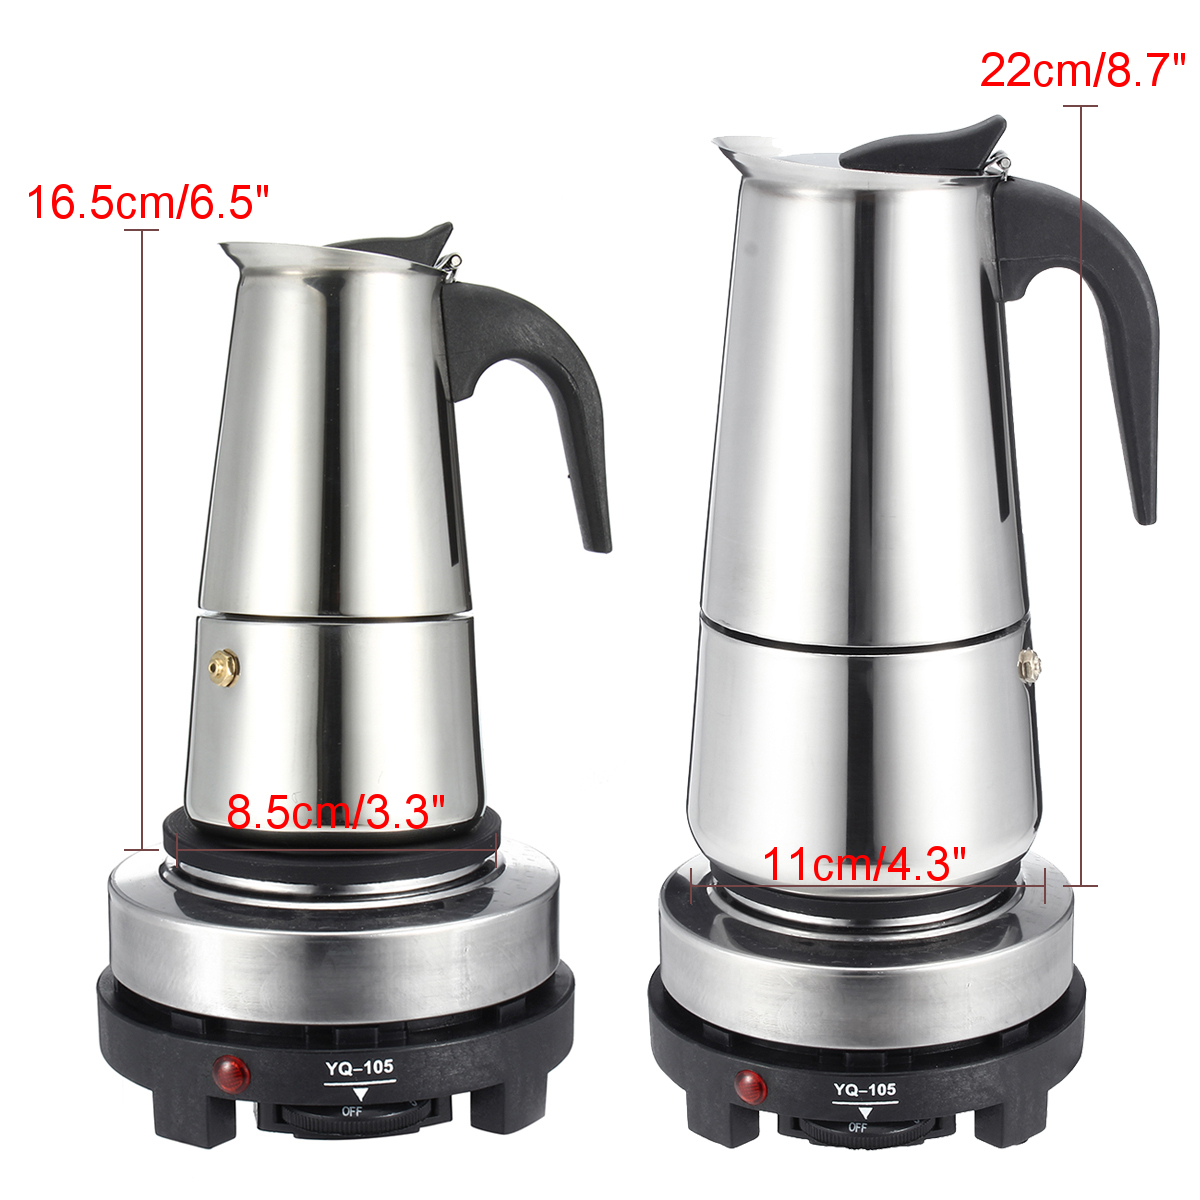 Espresso Moka Coffee Maker Pot Percolator Stainless Steel Electric Stove Electric Coffee Kettle 22